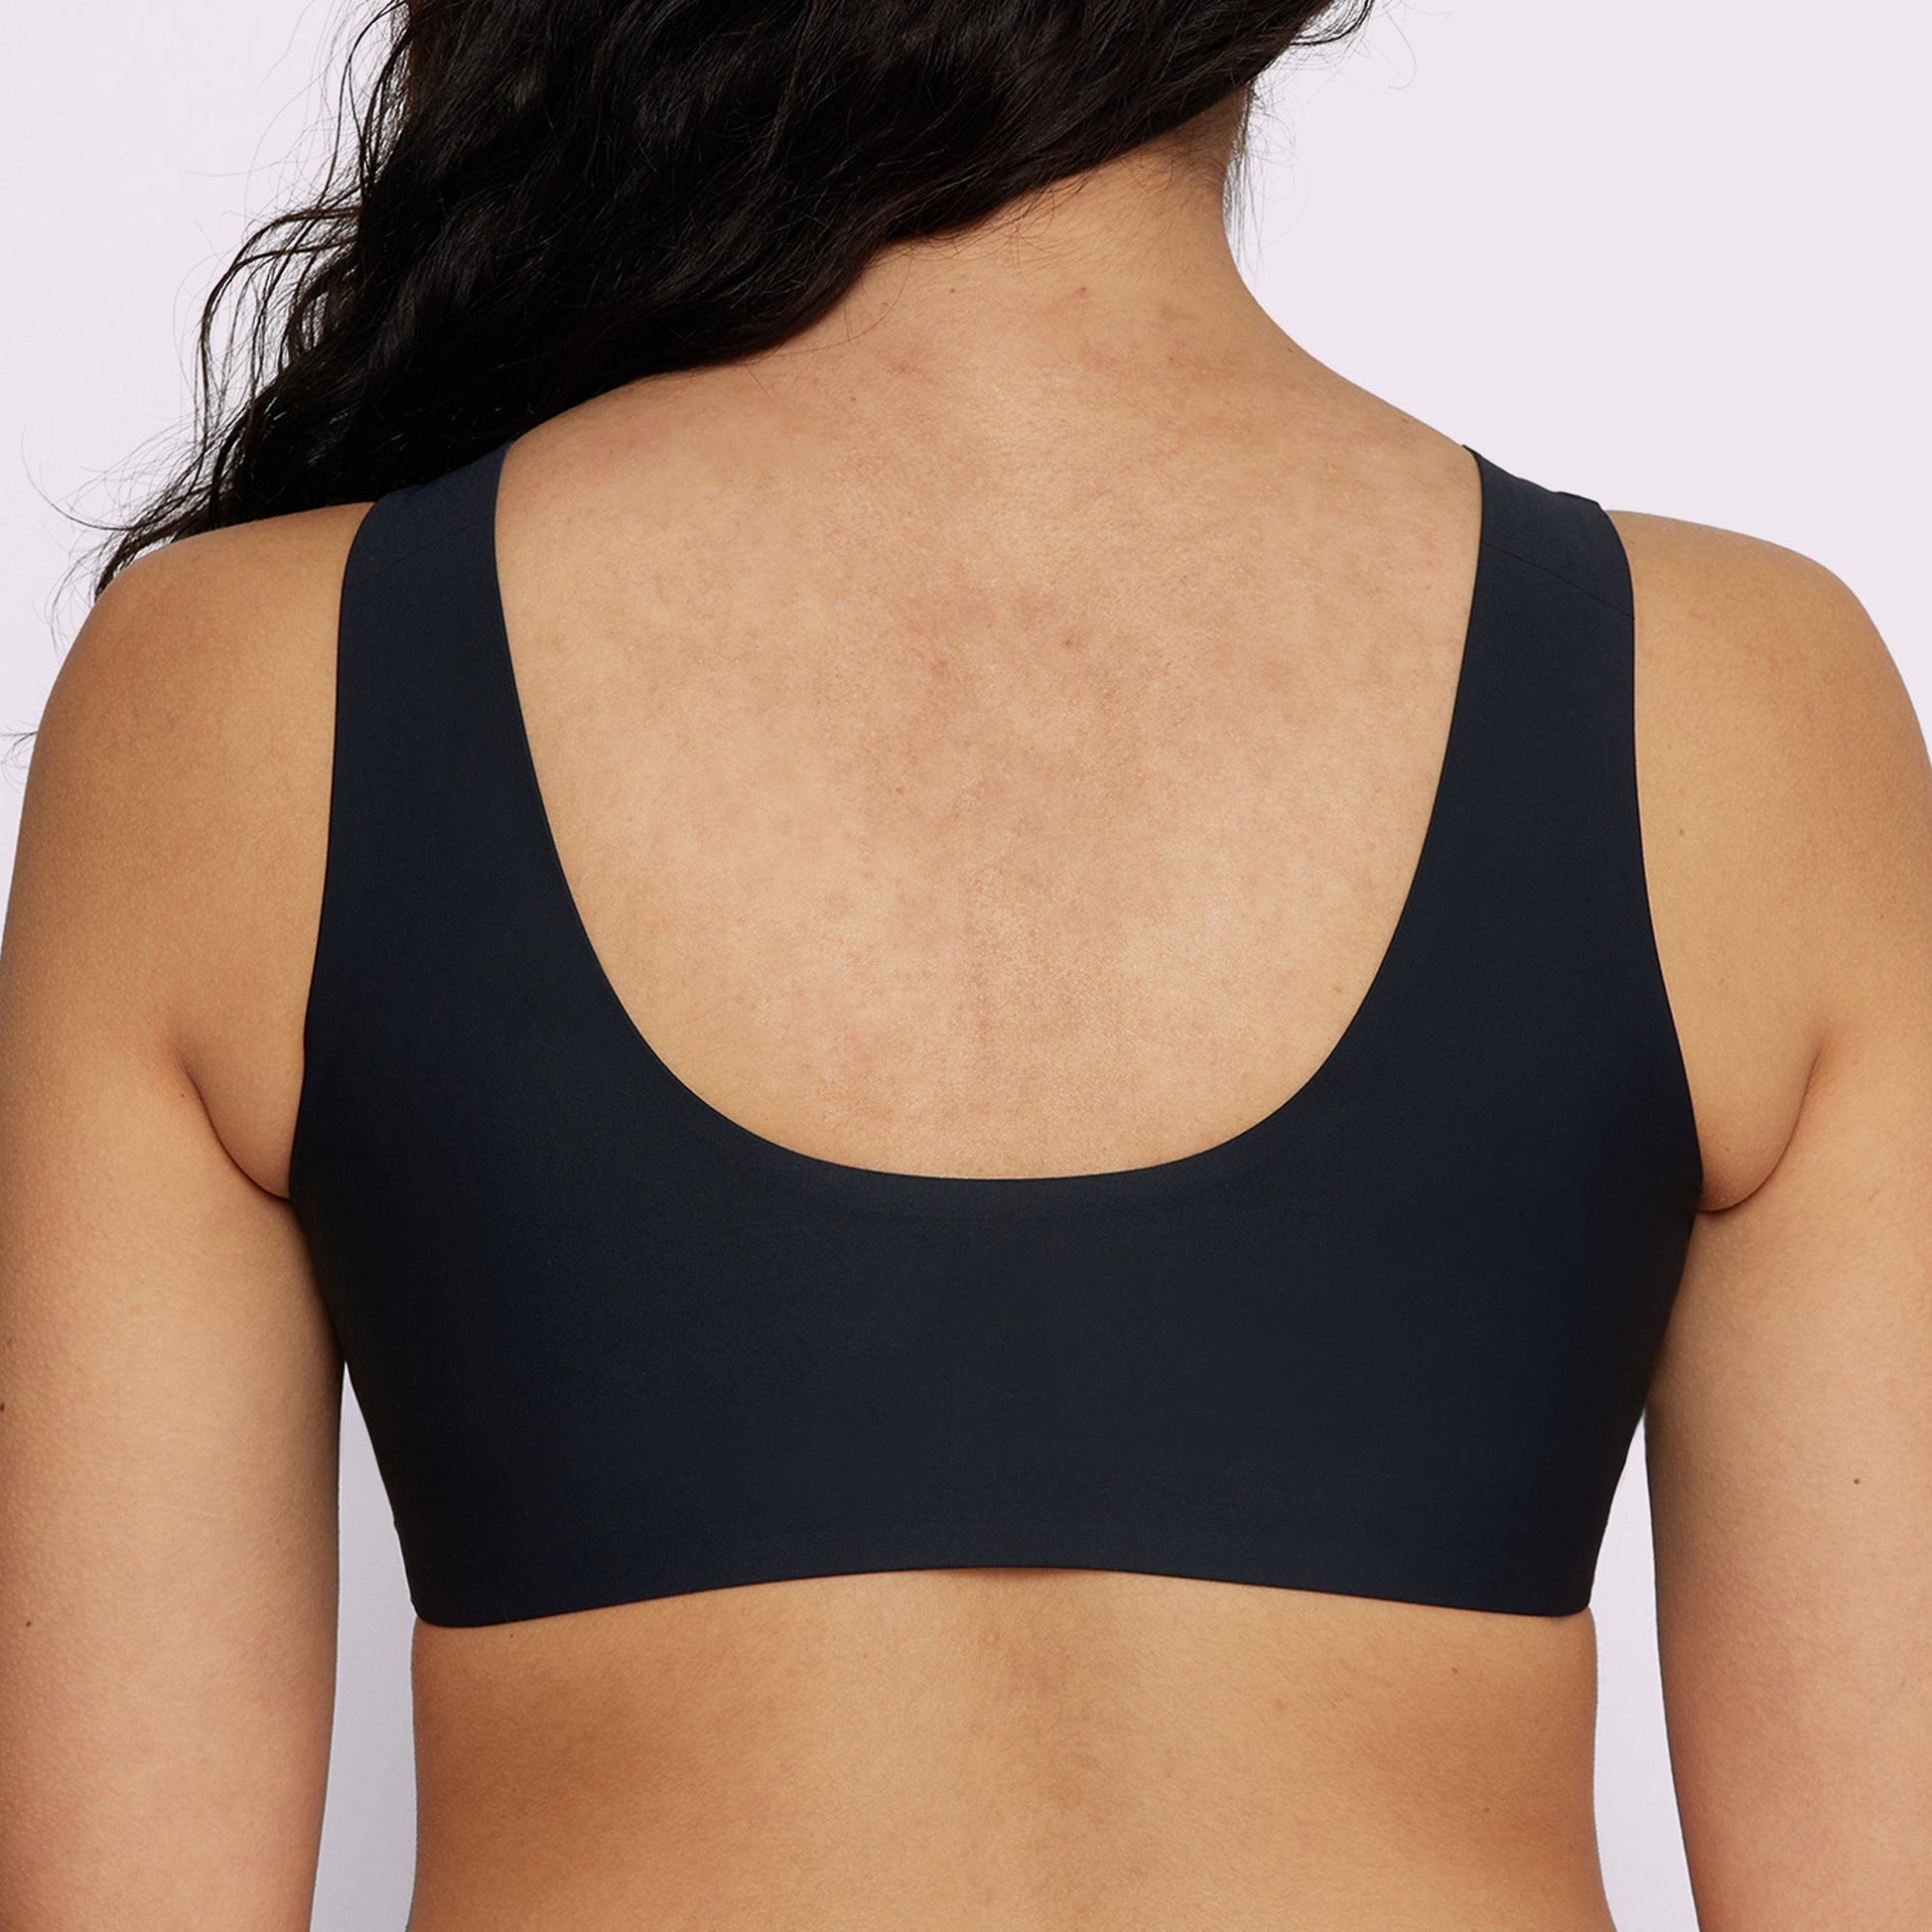 Creatives Unite Scoop Bra - Inspiring Sporty Cross-Back Straps for Added  Support - Shop Now!